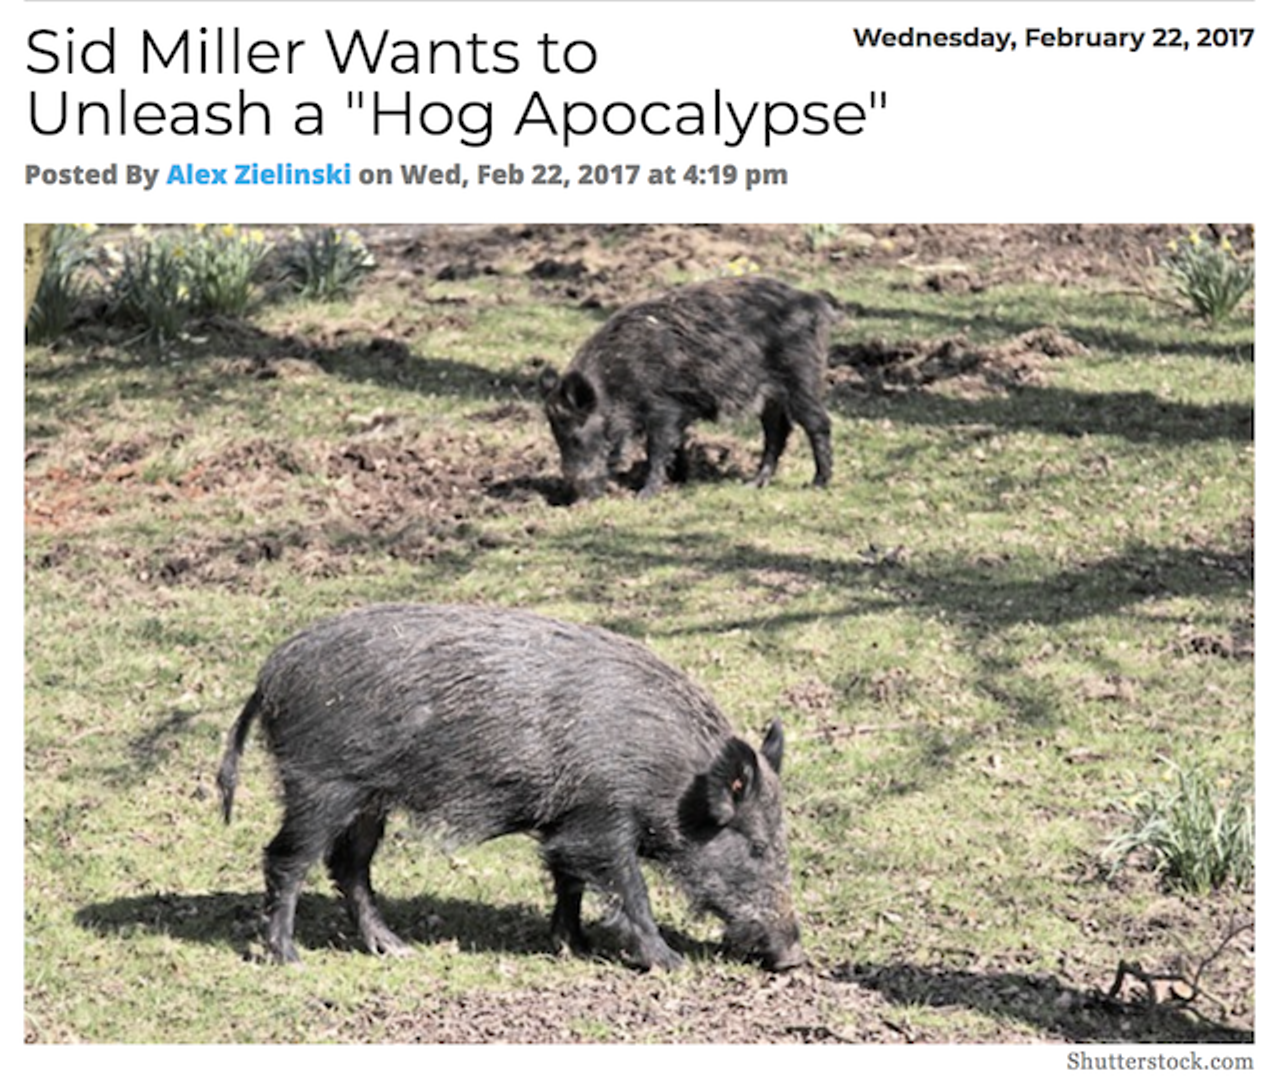 Sid Miller, a gem in the Internet age of memes, signed off on a plan to reduce the wild hog population: poison by toxic kibble. (Somewhat) surprisingly, it was Miller who dubbed this the “Hog Apocalypse.” Read more.